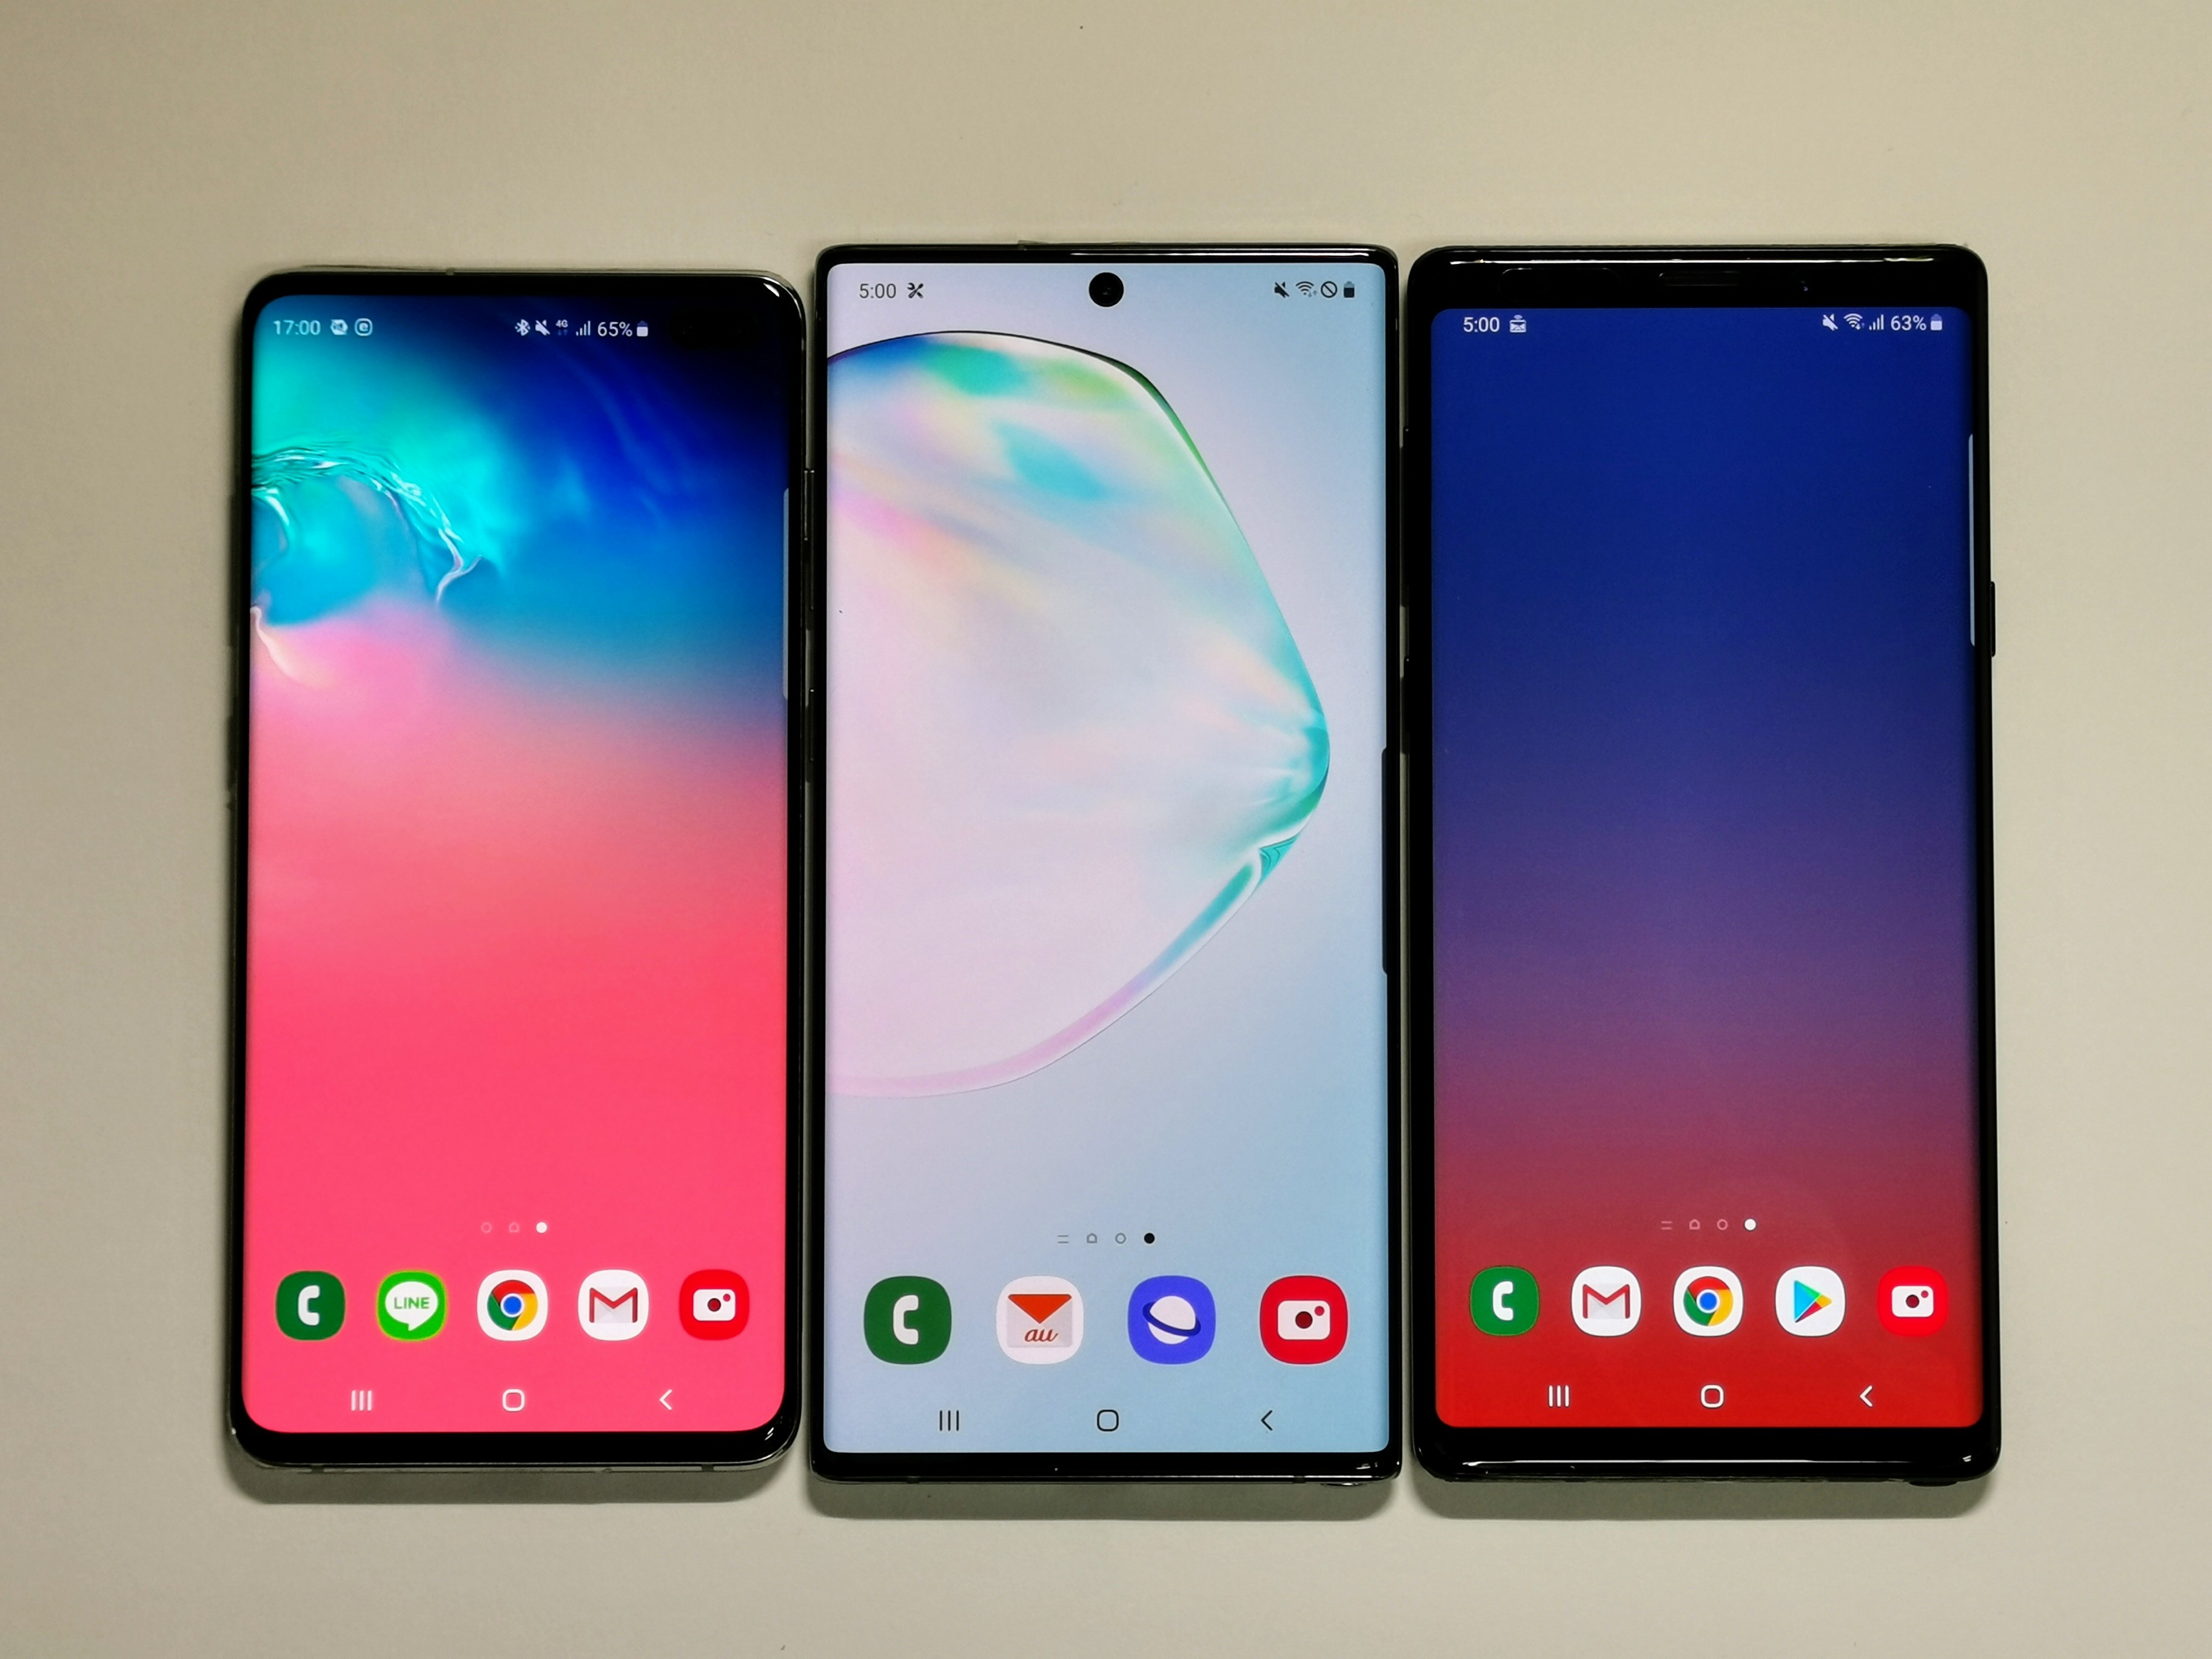 Galaxy Note10+(SC-01M / SCV45)を早速購入して旧モデルと比較－Galaxy Note10+/S10+/Note9